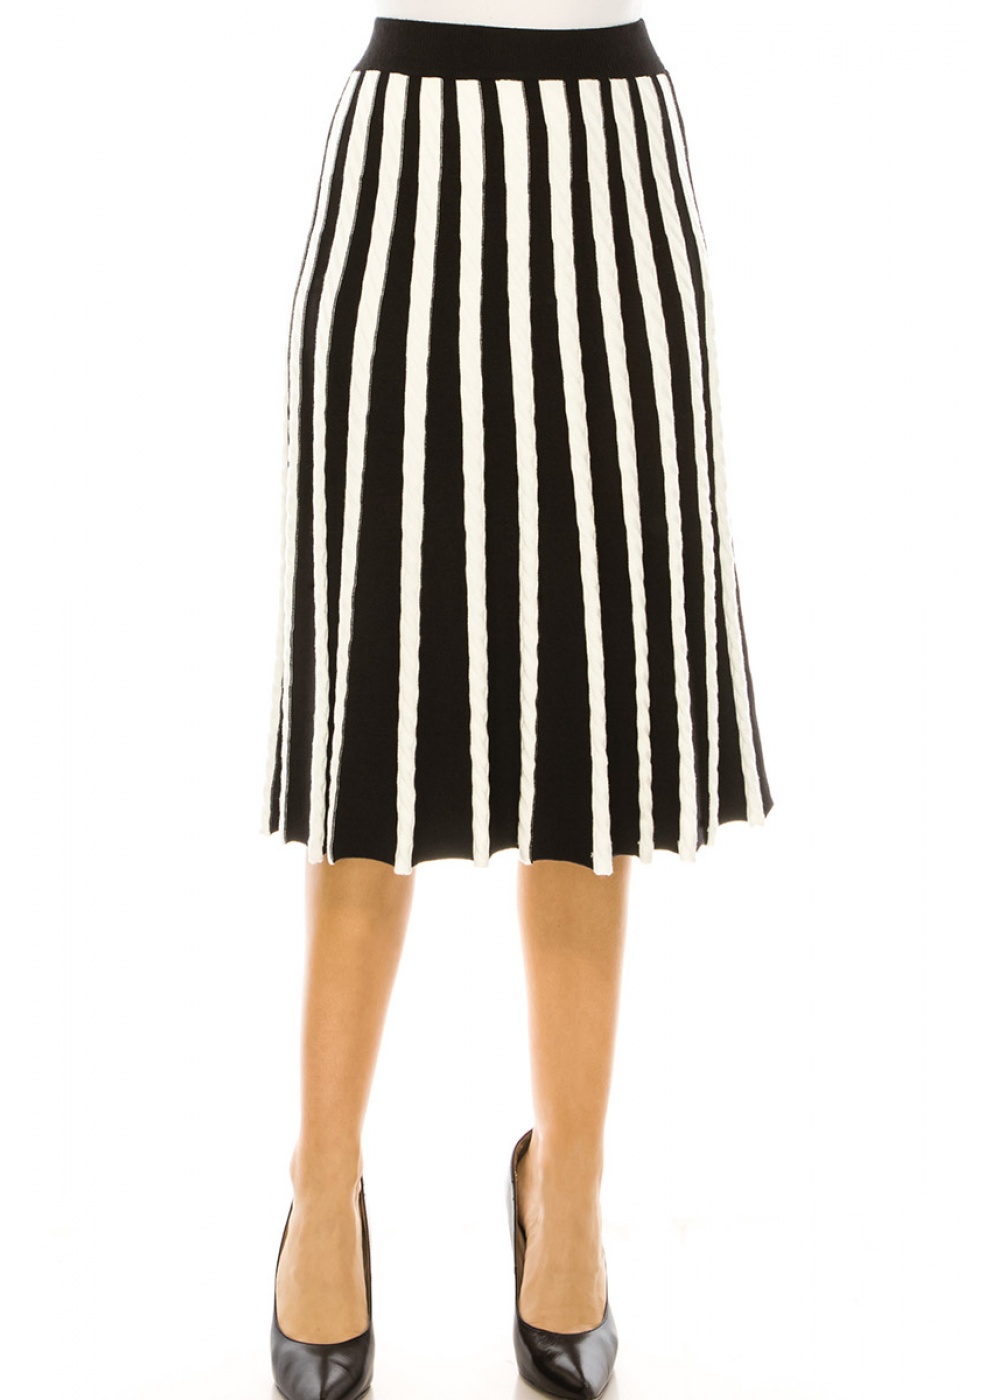 Striped Pleated Black And White Skirt